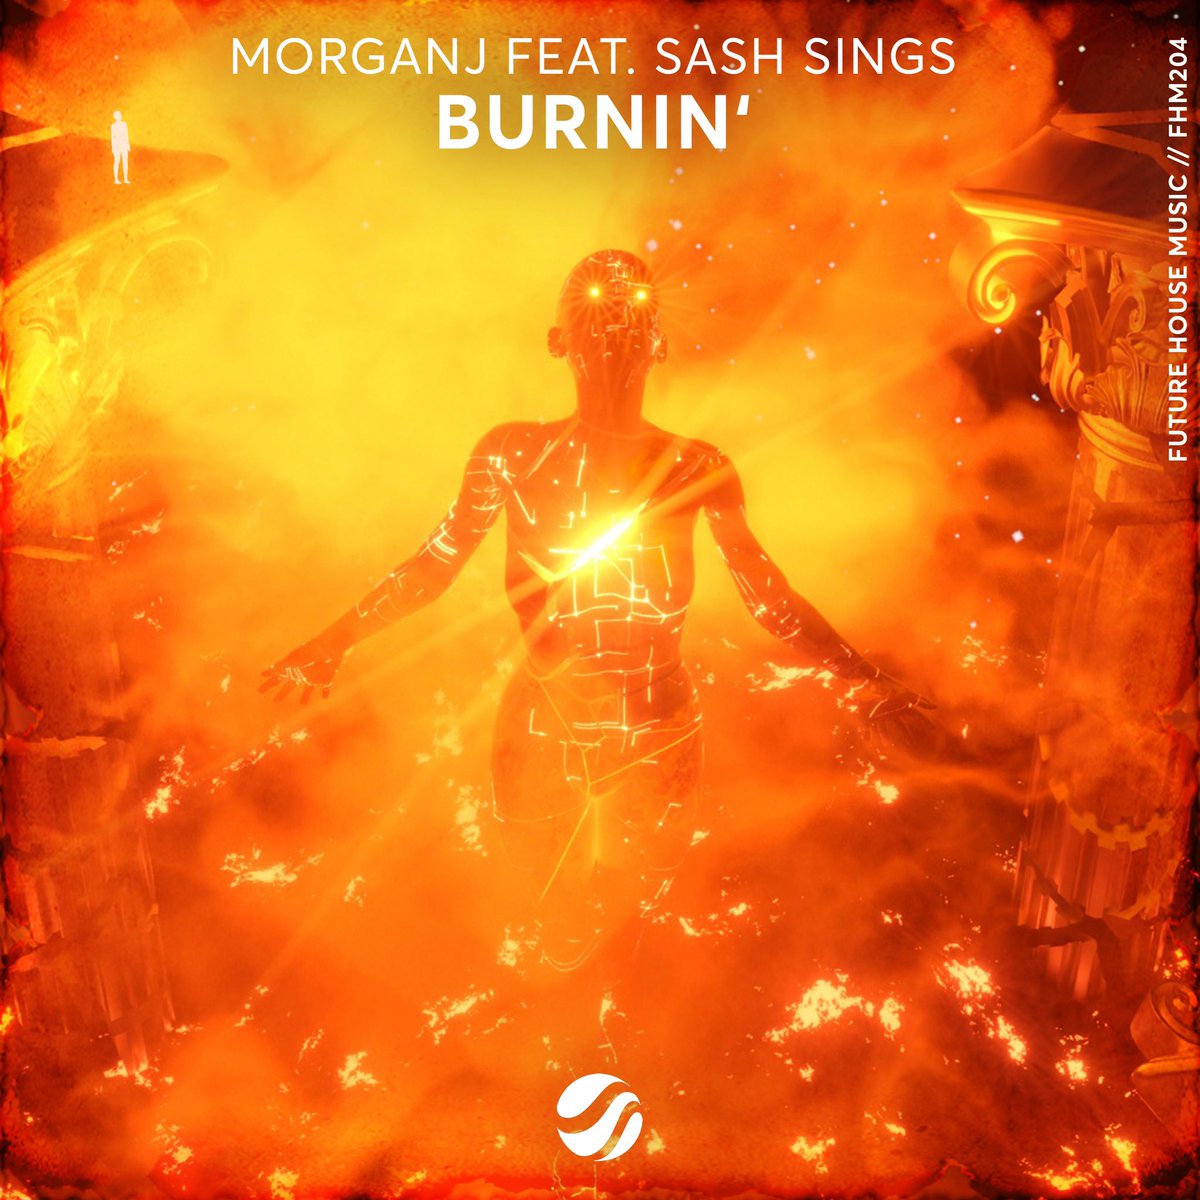 My new single BURNIN’ with the amazing singer @SashSings is coming this Friday on @FutureHousMusic 🔥